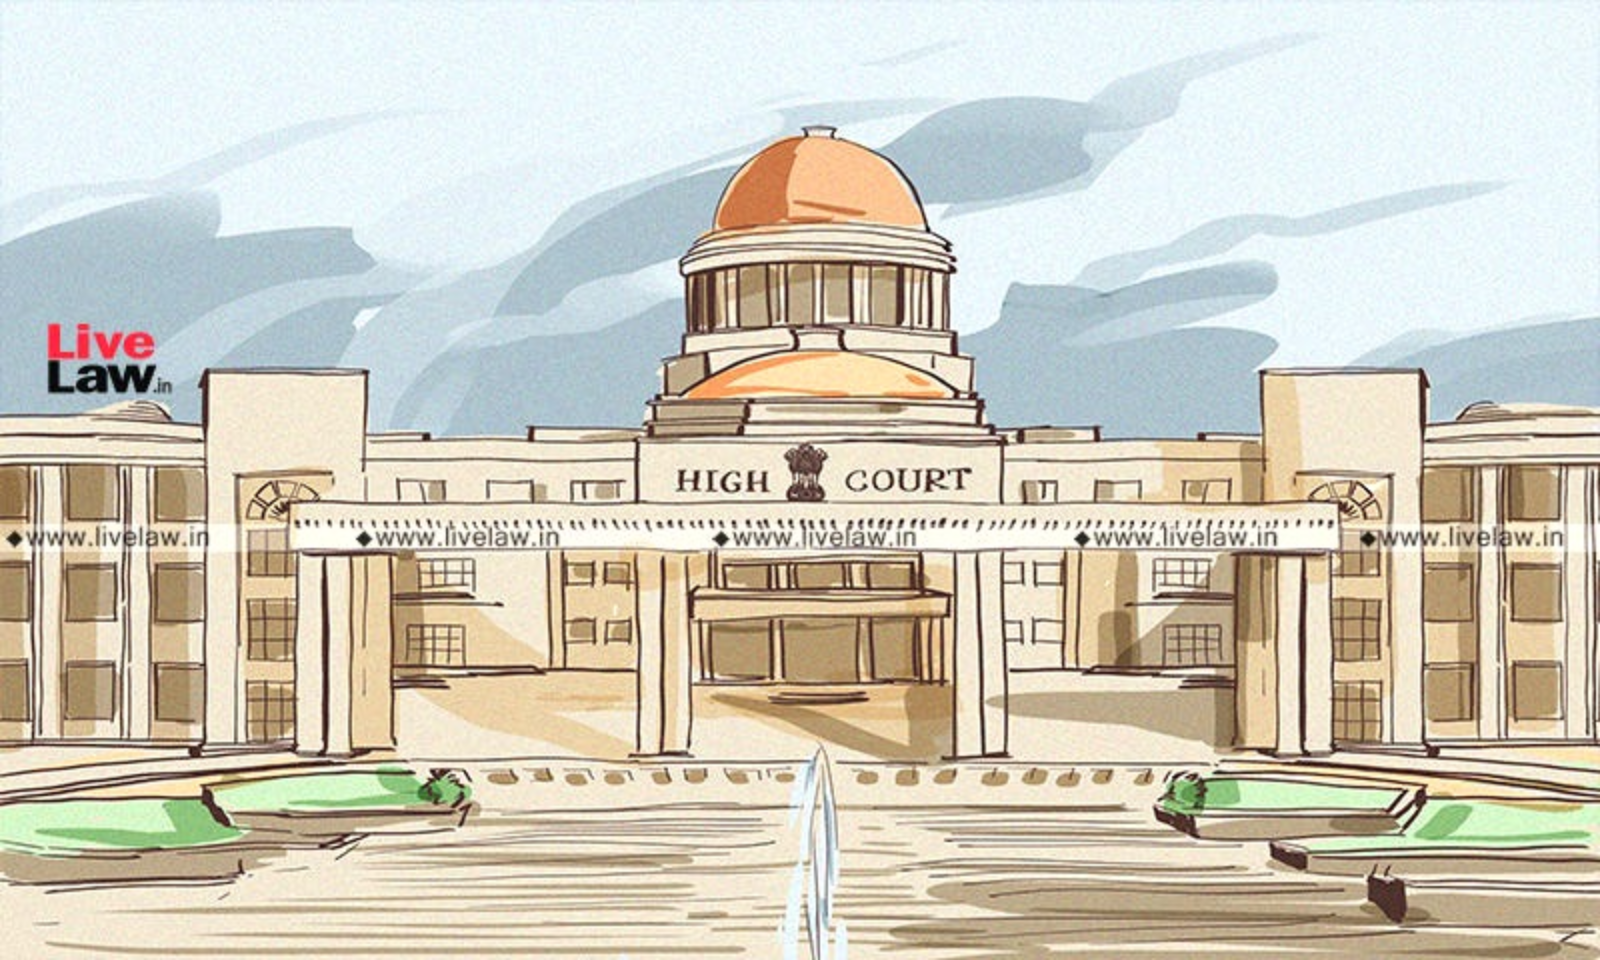 Long Forgotten Cases Revived 2 CB Sittings Split Verdict  More   Chronicle Of An Eventful Day In Supreme Court